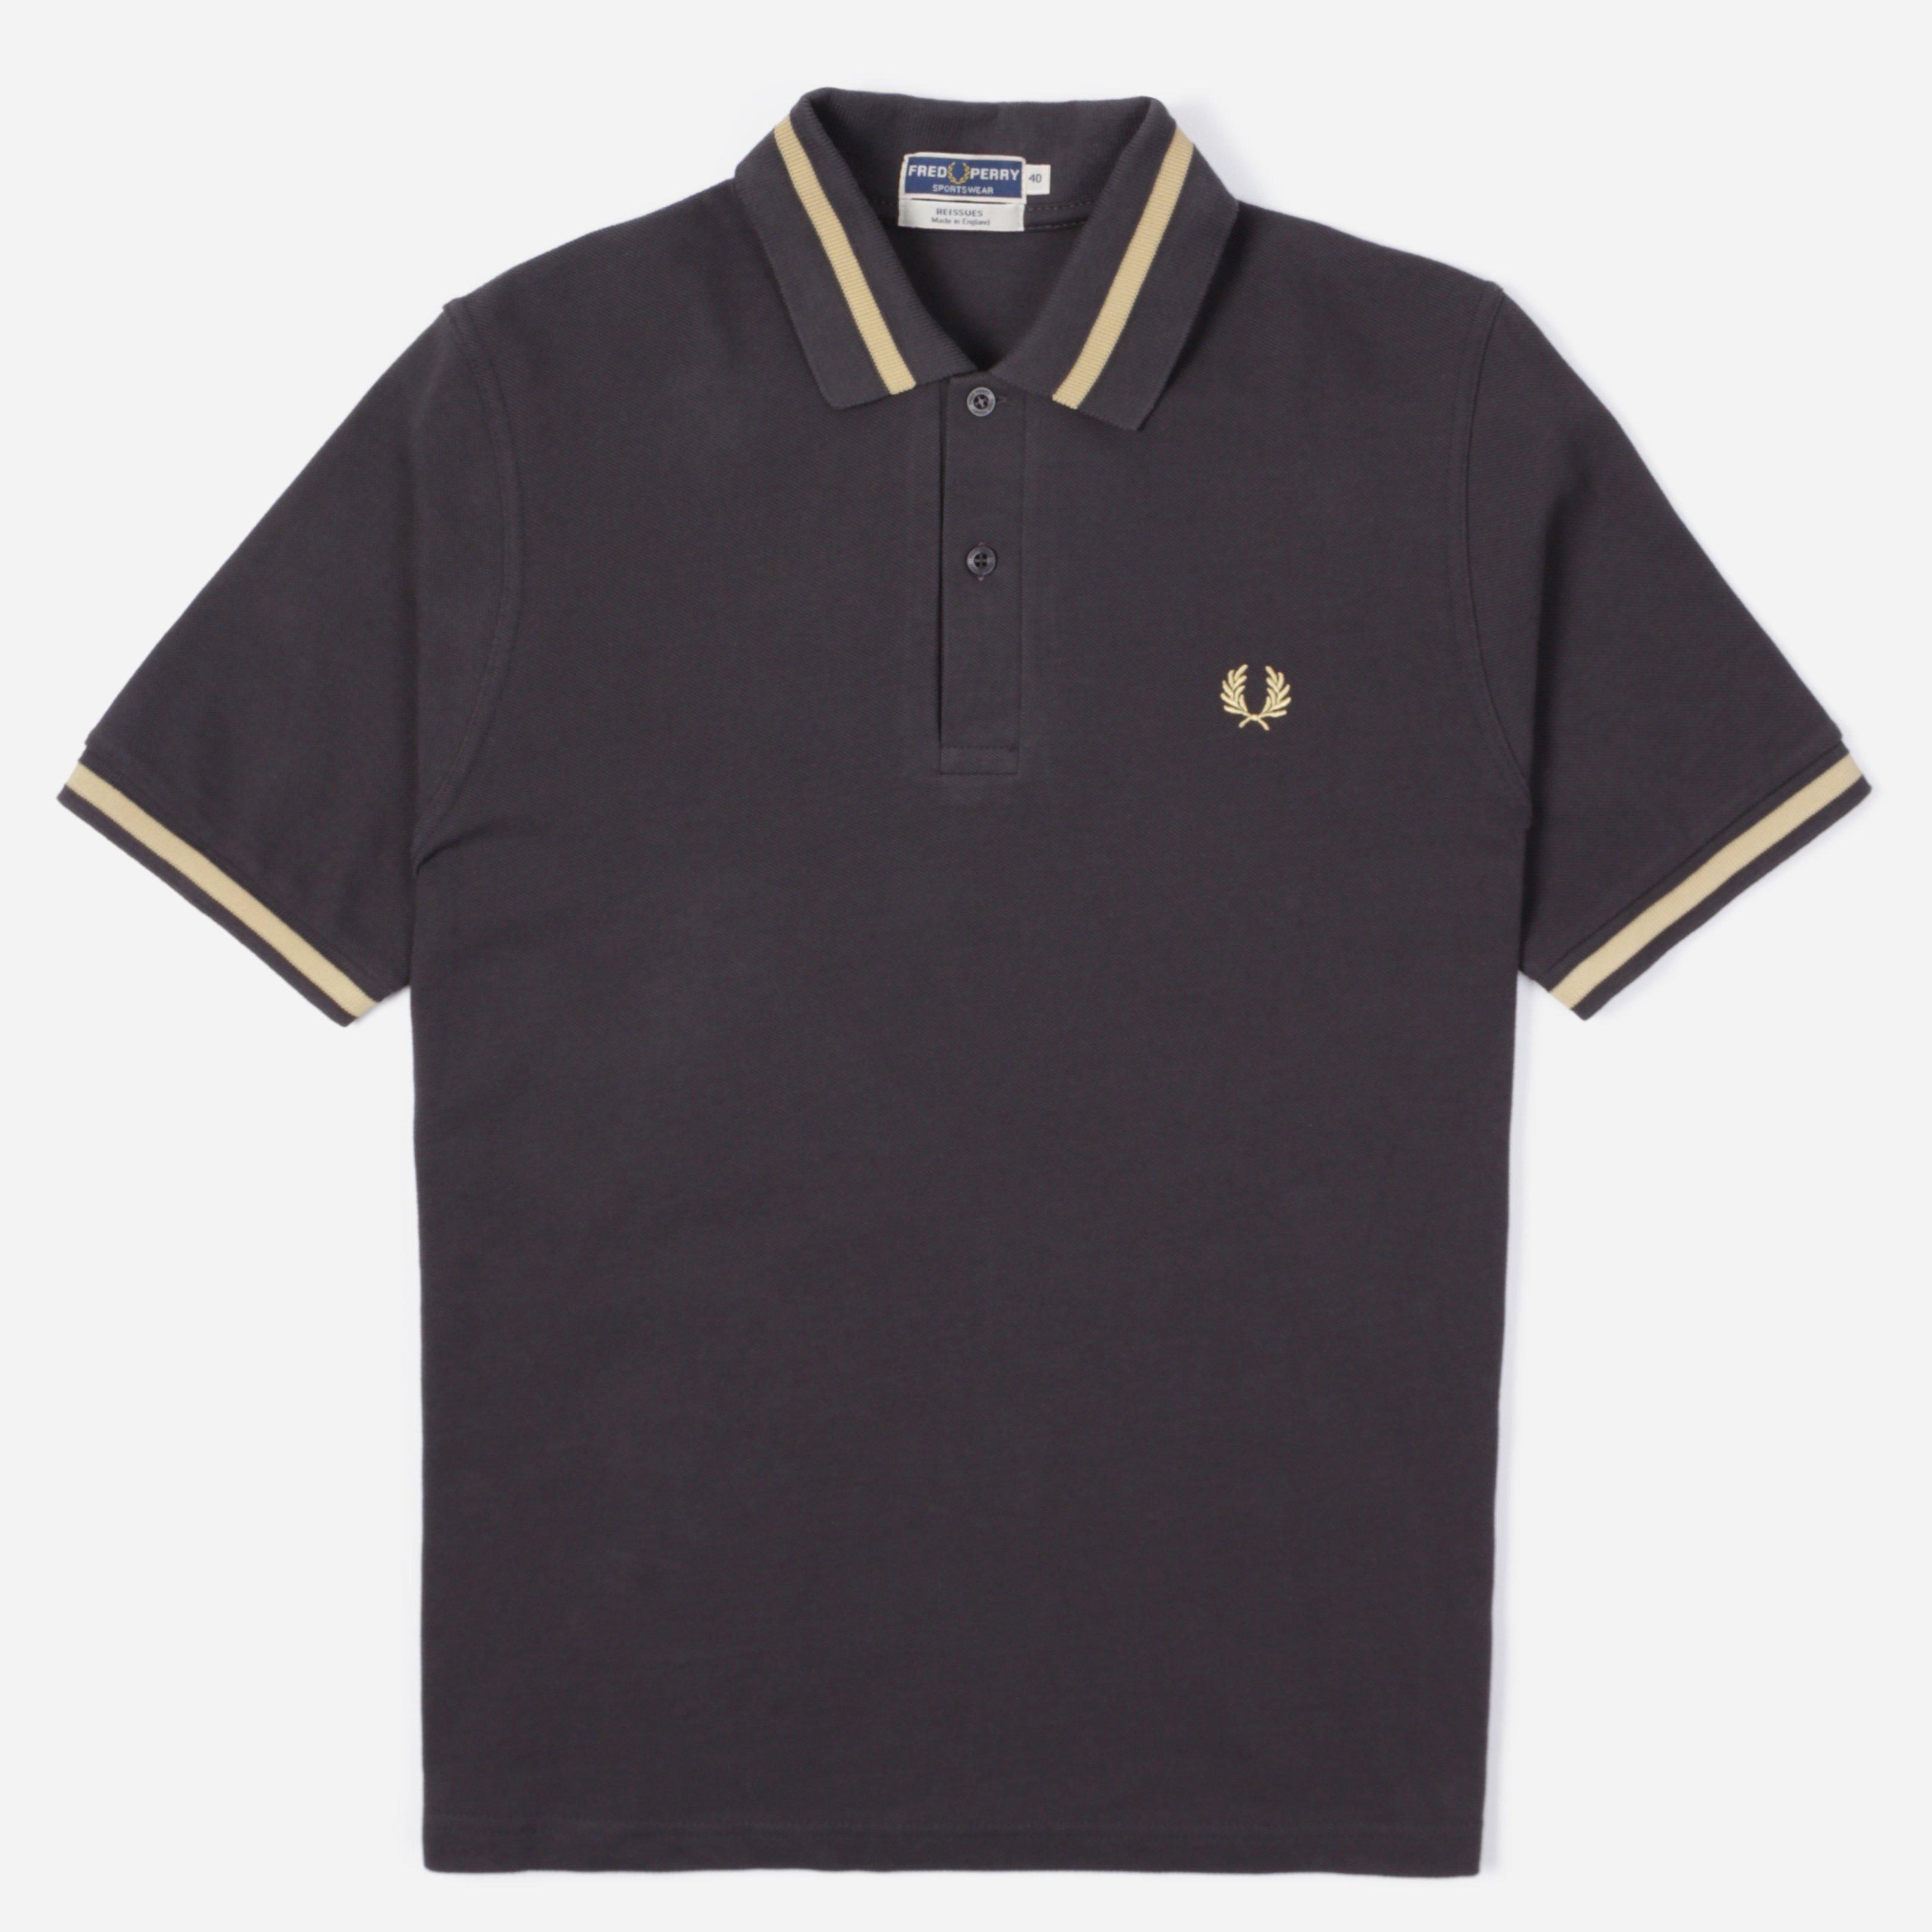 Fred Perry Reissues Single Tipped Polo Shirt in Gray for Men - Lyst